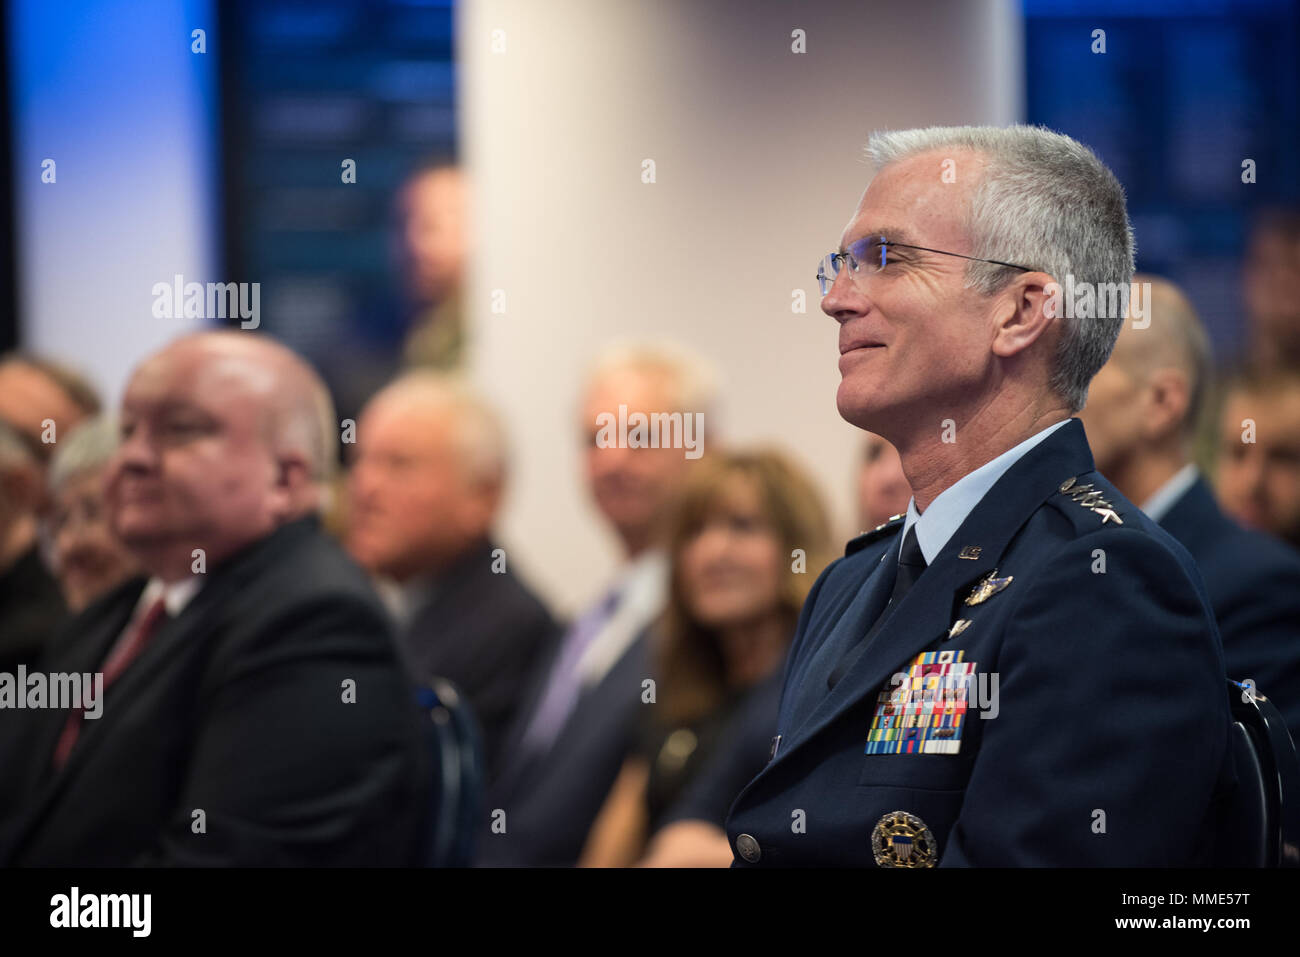 U.S. Air Force Gen. Paul J. Selva, Vice Chairman of the Joint Chiefs of Staff, is introduced during the 2017 Spirit of Hope Awards at the Hall of Heroes in the Pentagon, Oct. 26, 2017. The Spirit of Hope Award is awarded to men and women of the U.S. Armed Forces, entertainers, and other distinguished Americans and organizations whose patriotism and service reflect that of Mr. Bob Hope. The recipients selflessly contributed an extraordinary amount of time, talent, or resources to significantly enhance the quality of life or service members and their families serving around the world. (DoD Photo Stock Photo